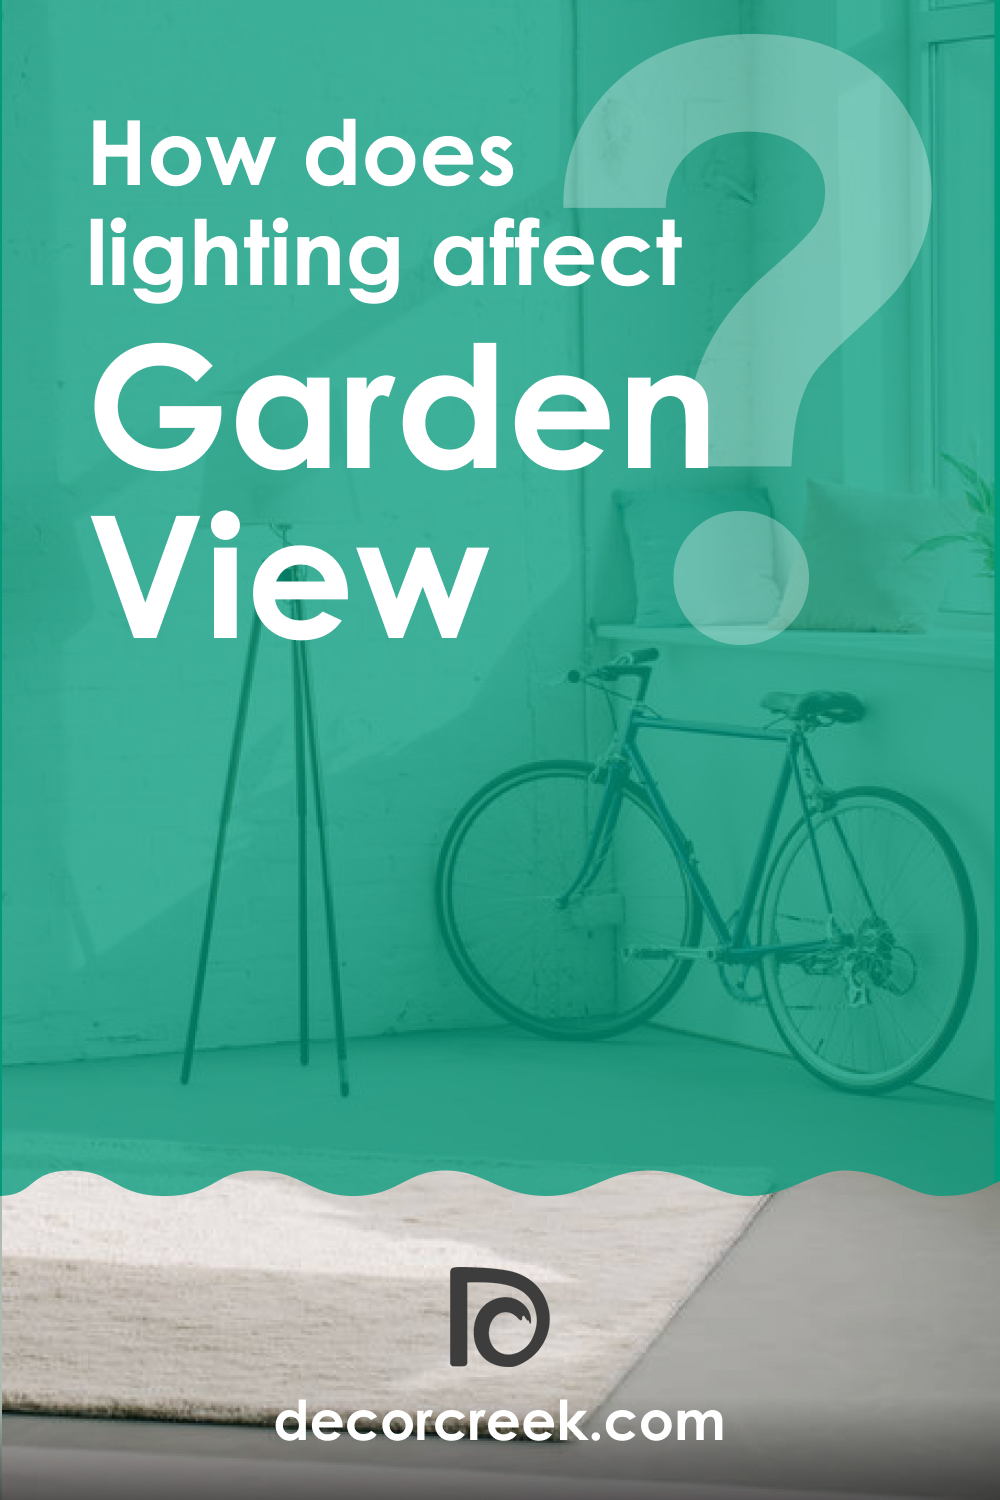 How Does Lighting Affect Garden View 616?